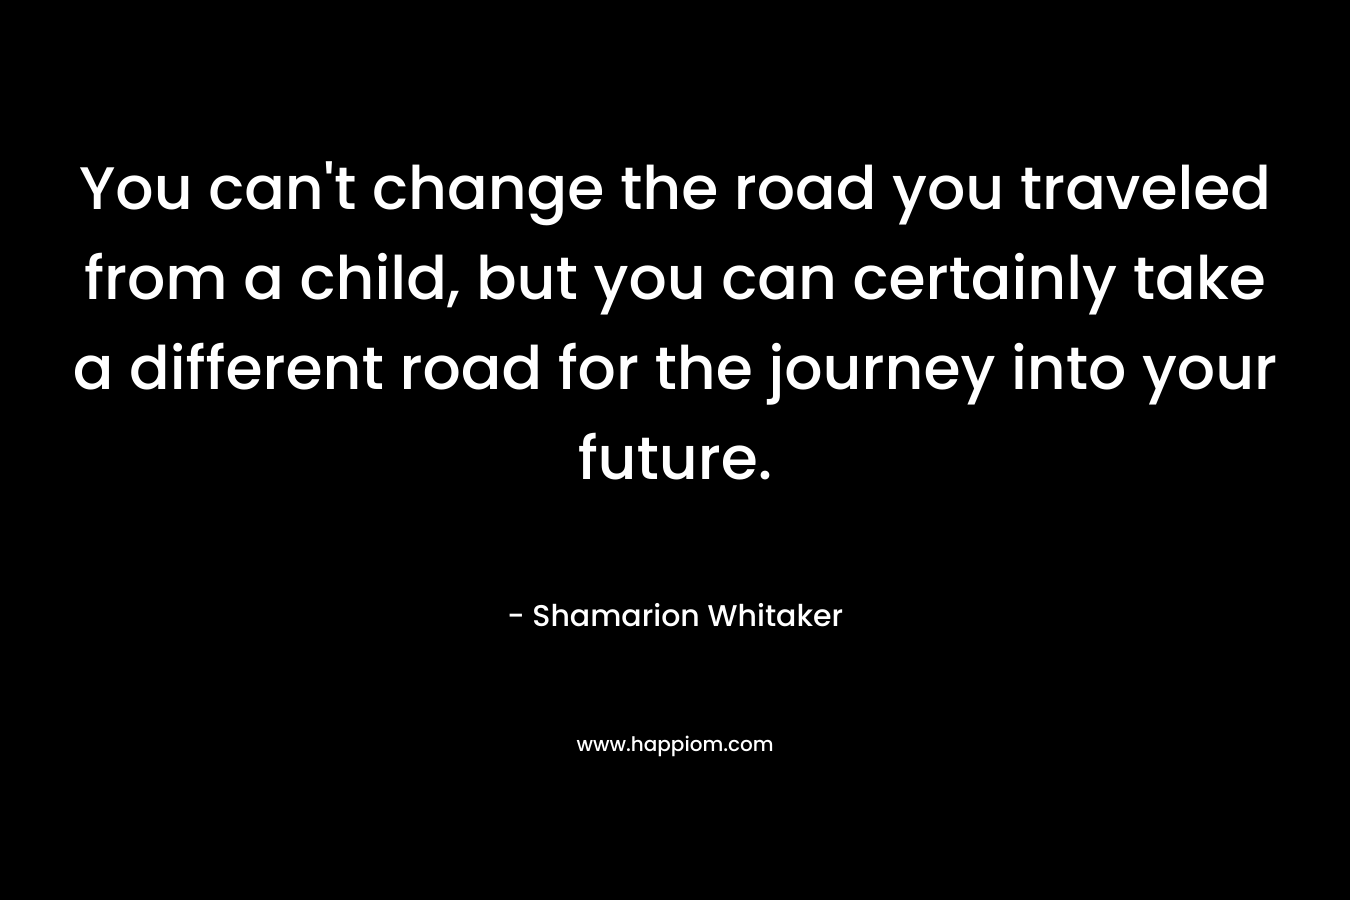 You can’t change the road you traveled from a child, but you can certainly take a different road for the journey into your future. – Shamarion Whitaker